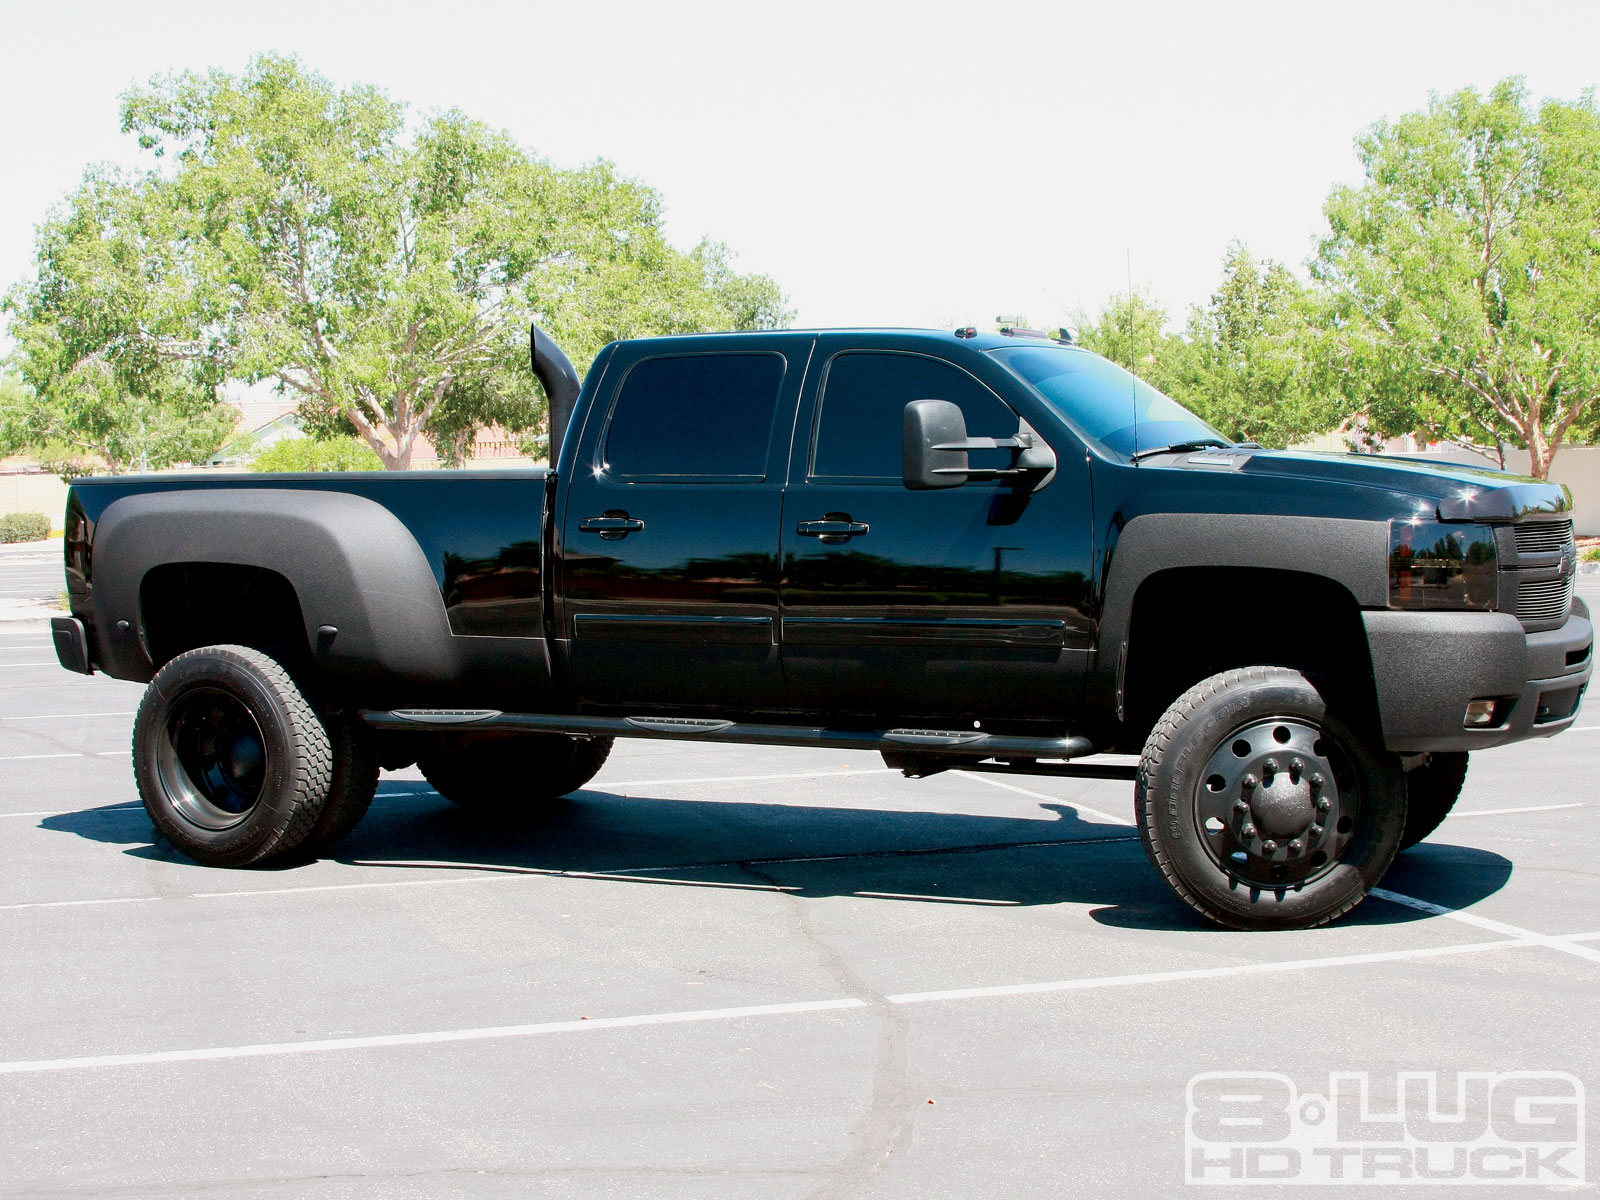 Old Lifted Chevy Silverado HD Wallpaper For Windows